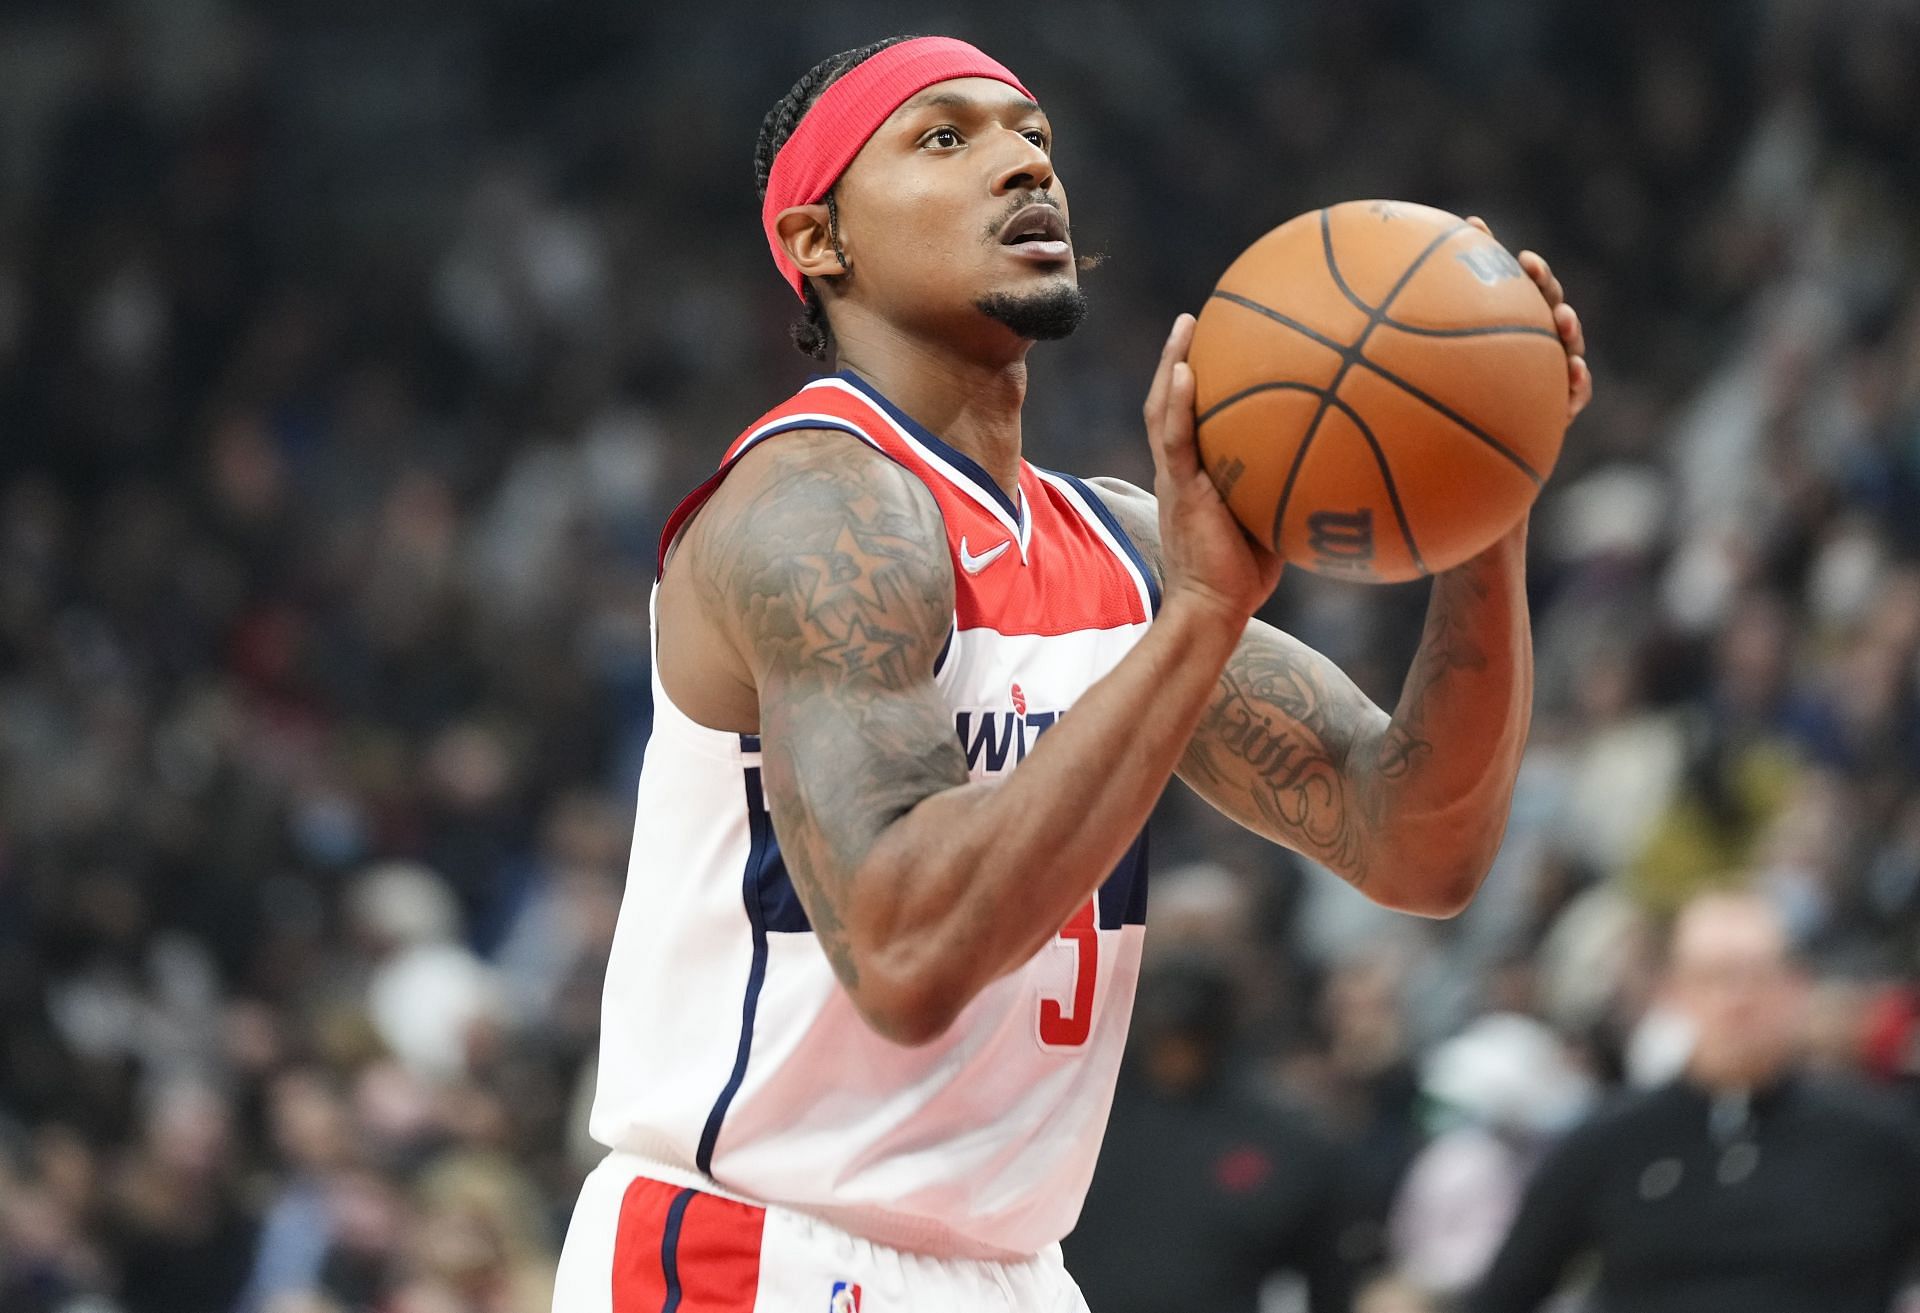 Bradley Beal #3 of the Washington Wizards has been perfect from the line so far this season